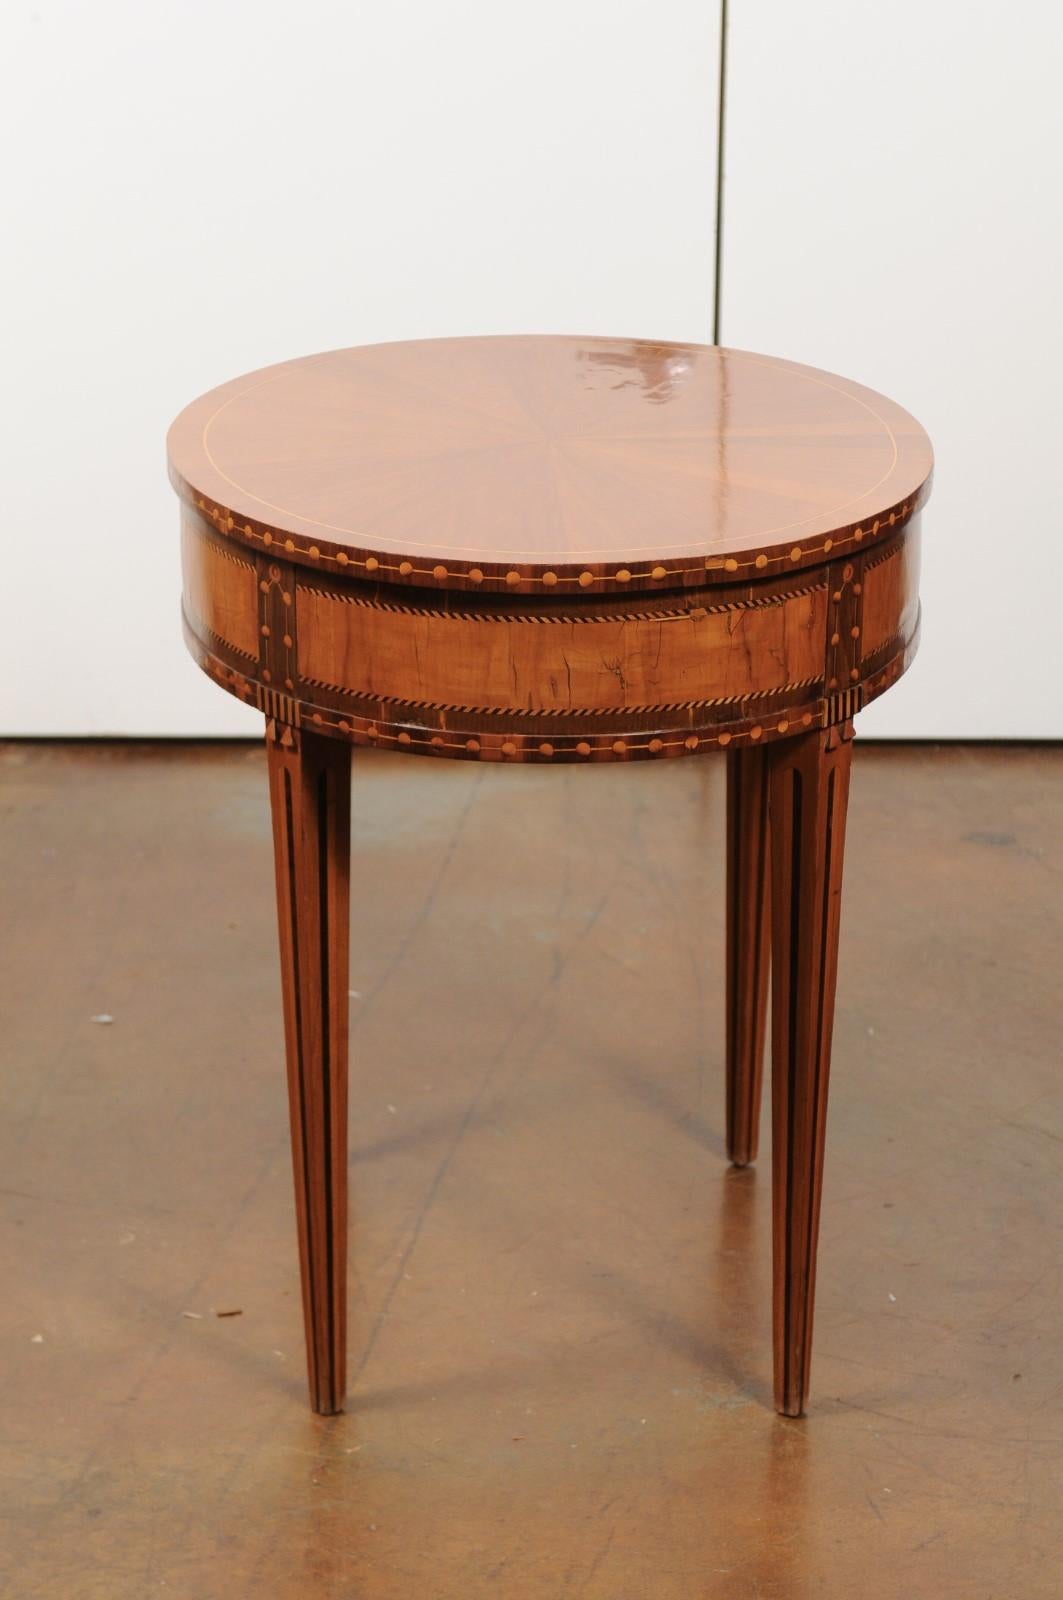 French 19th Century Oval Walnut and Satinwood Inlaid Table with Radiating Veneer 3